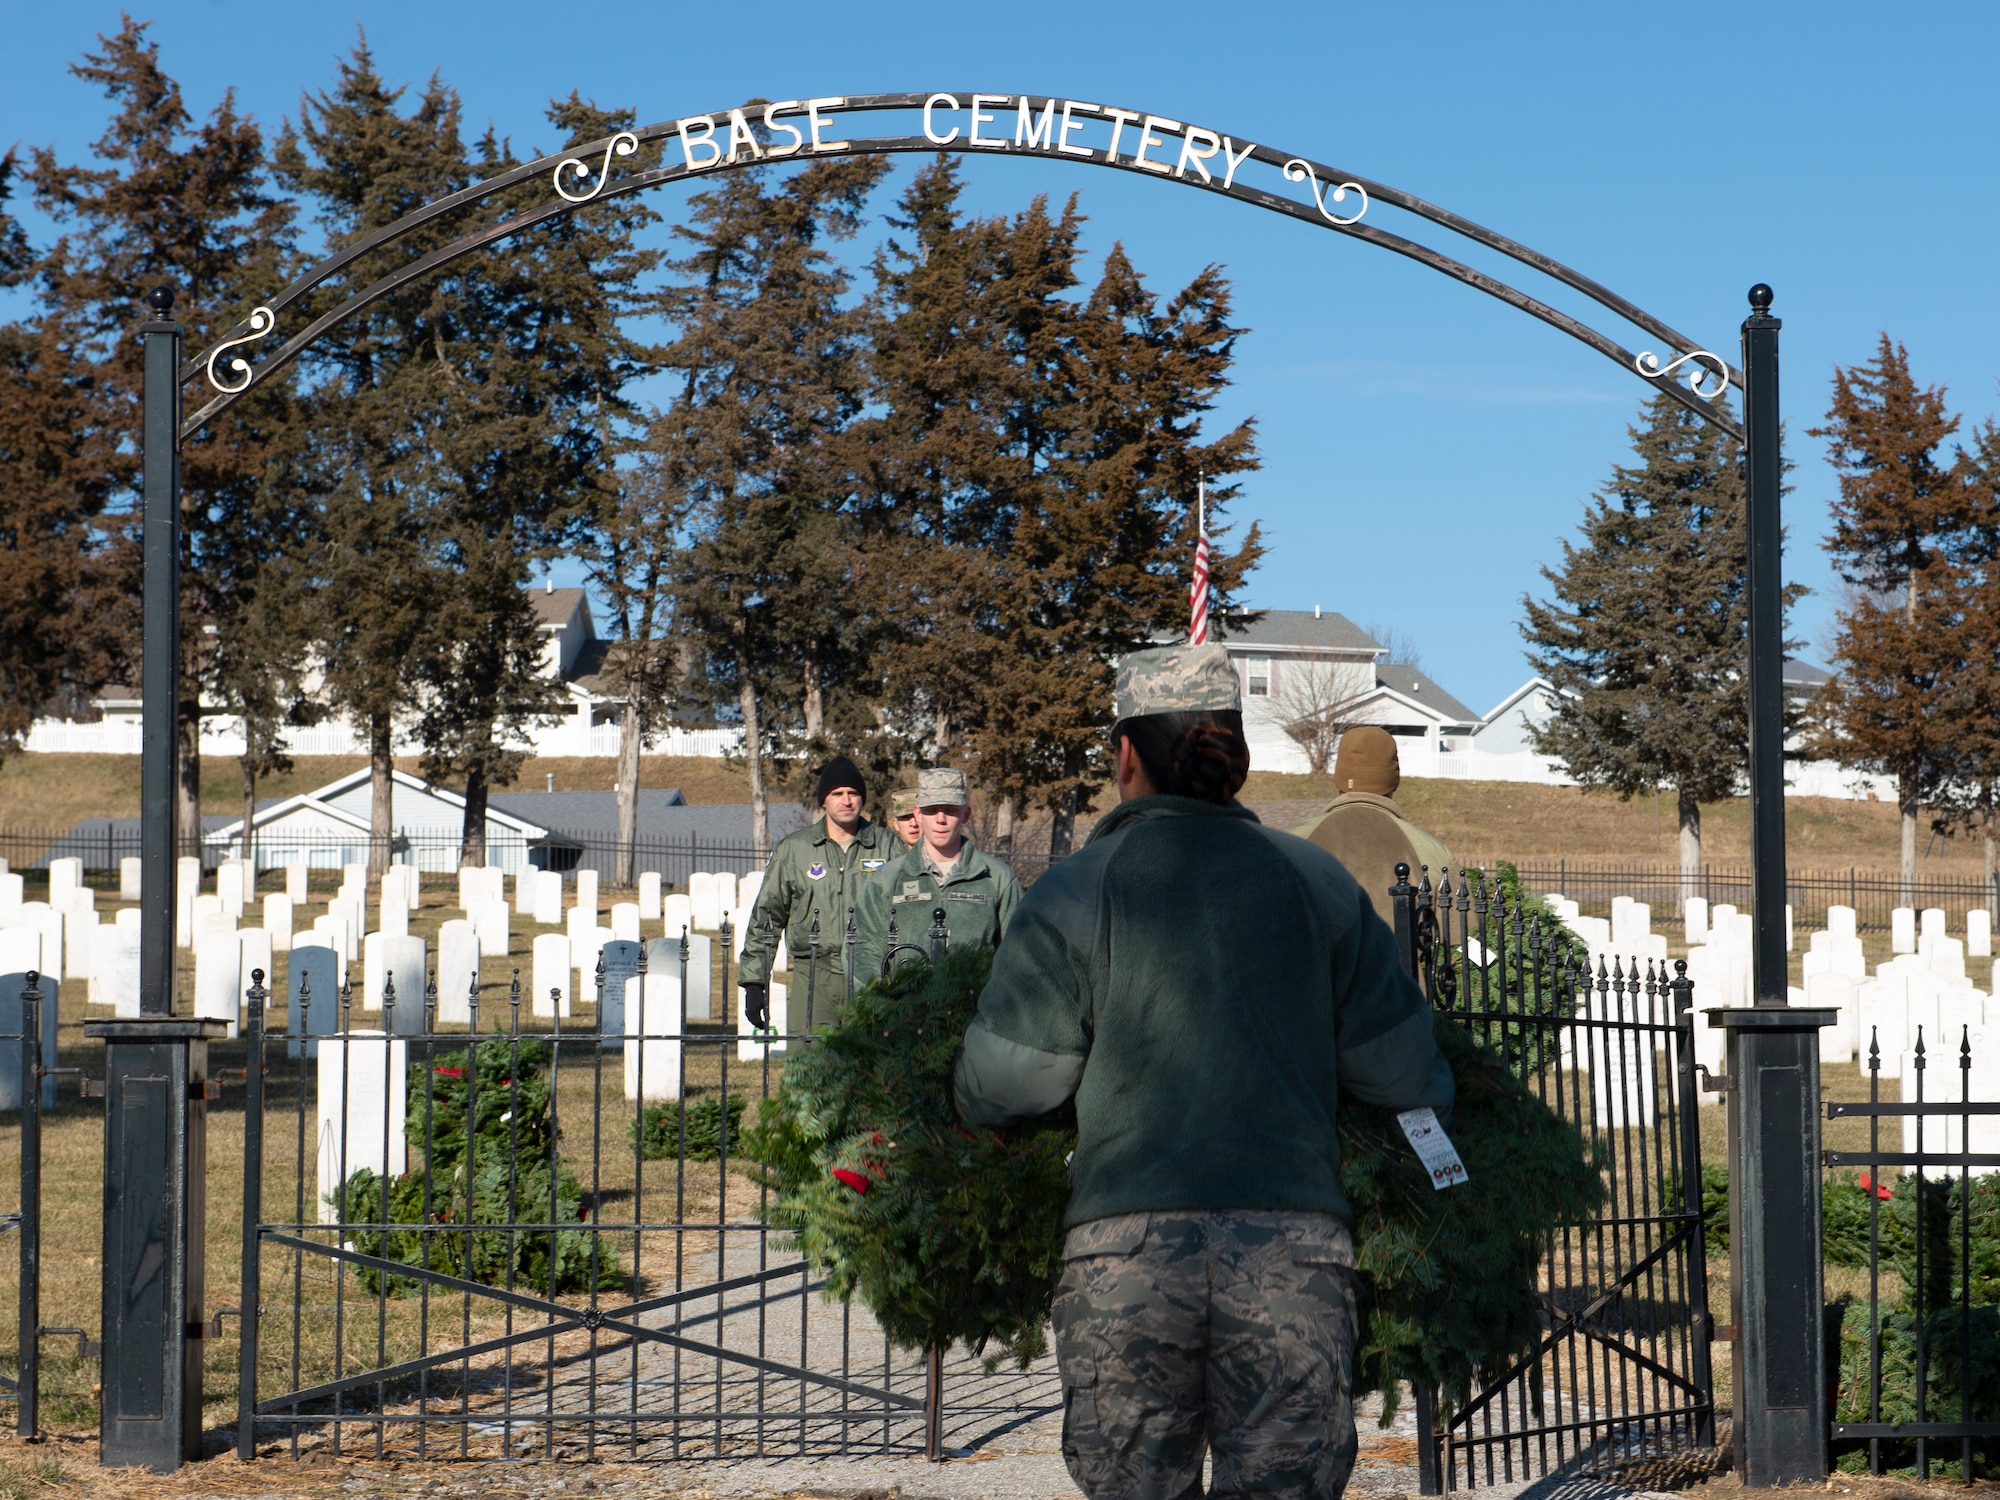 Members of Team Offutt carry wreaths to the base cemetery at Offutt Air Force Base, Neb., Dec. 11, 2019. The wreaths were placed at the end of each headstone row in preparation for an annual Wreaths Across America ceremony